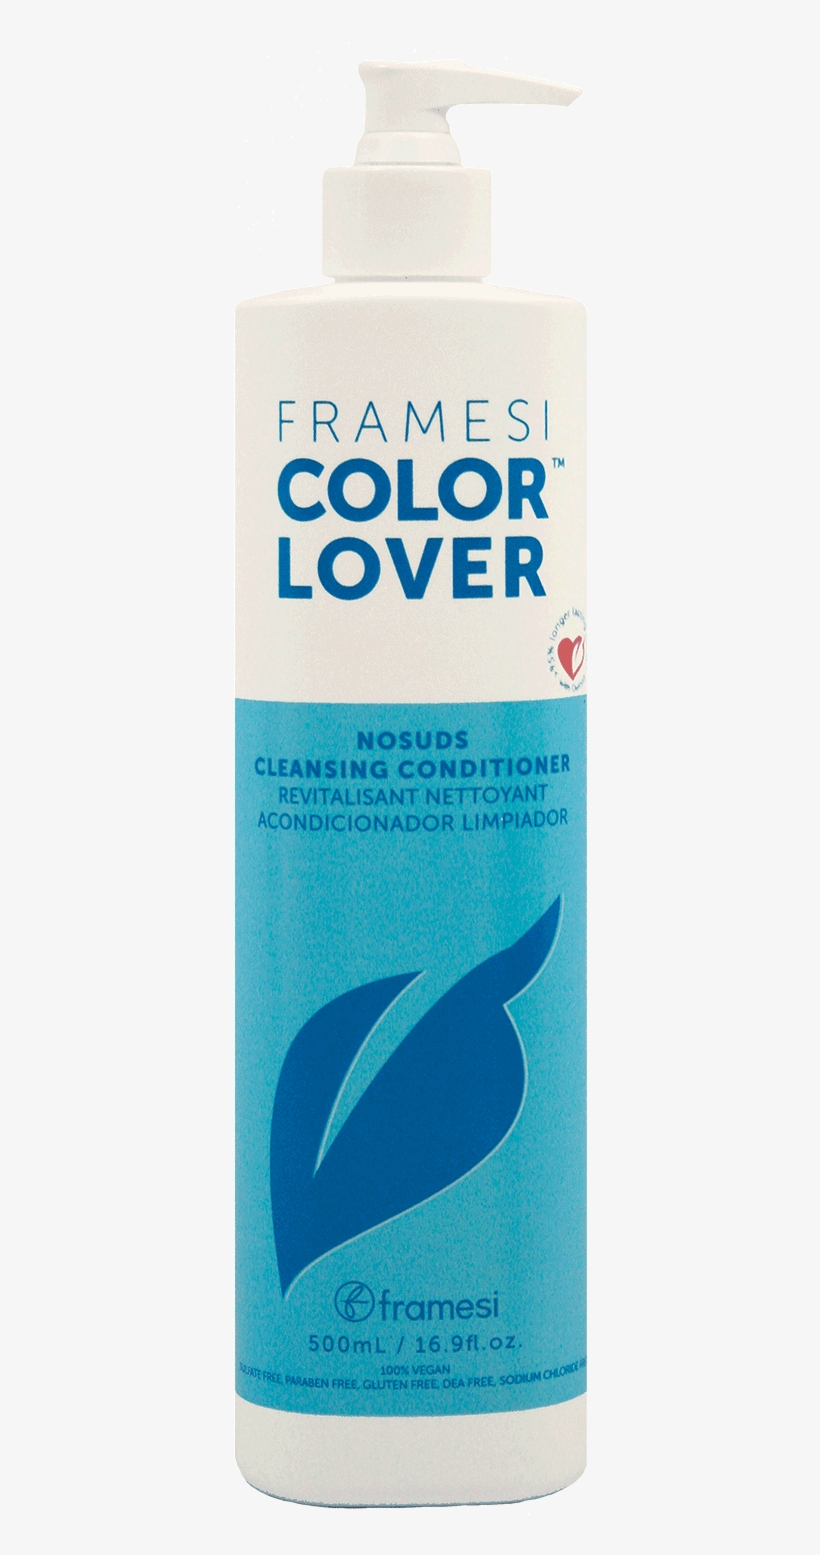 No Suds Cleansing Conditioner - Framesi Color Lover Moisture Rich Conditioner 16.9, transparent png #549206